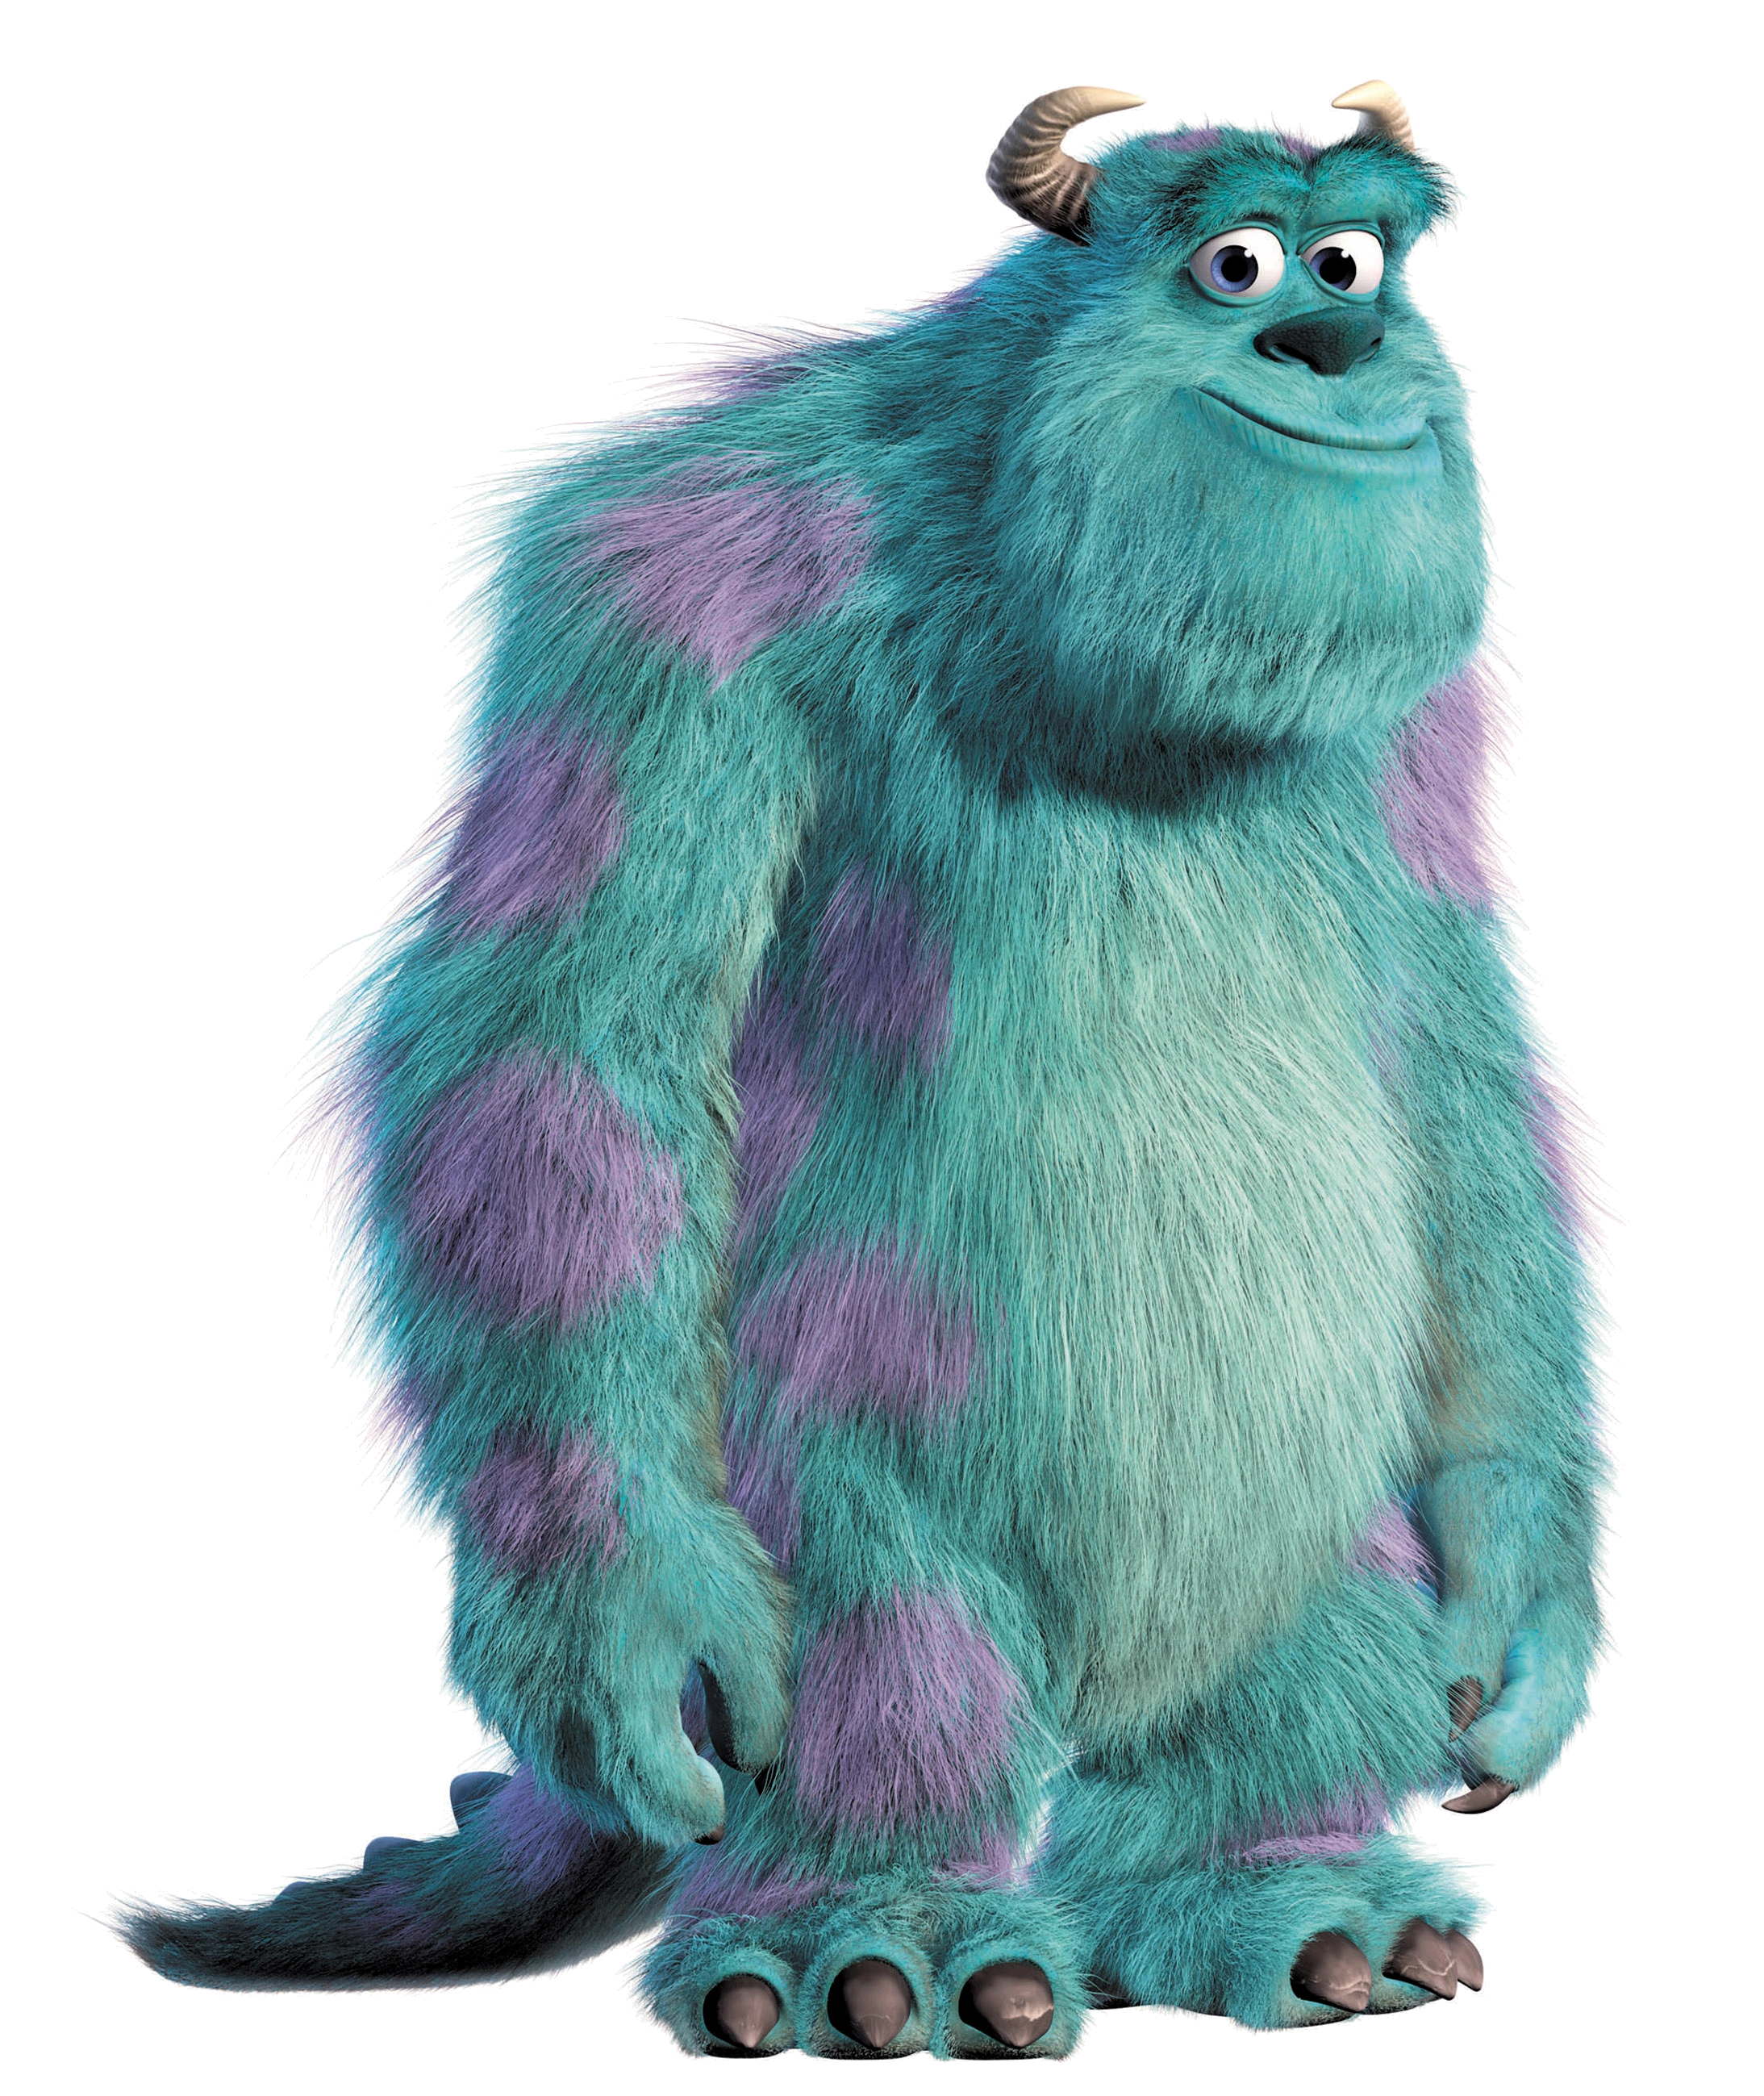 What Is Sulley's First Name?